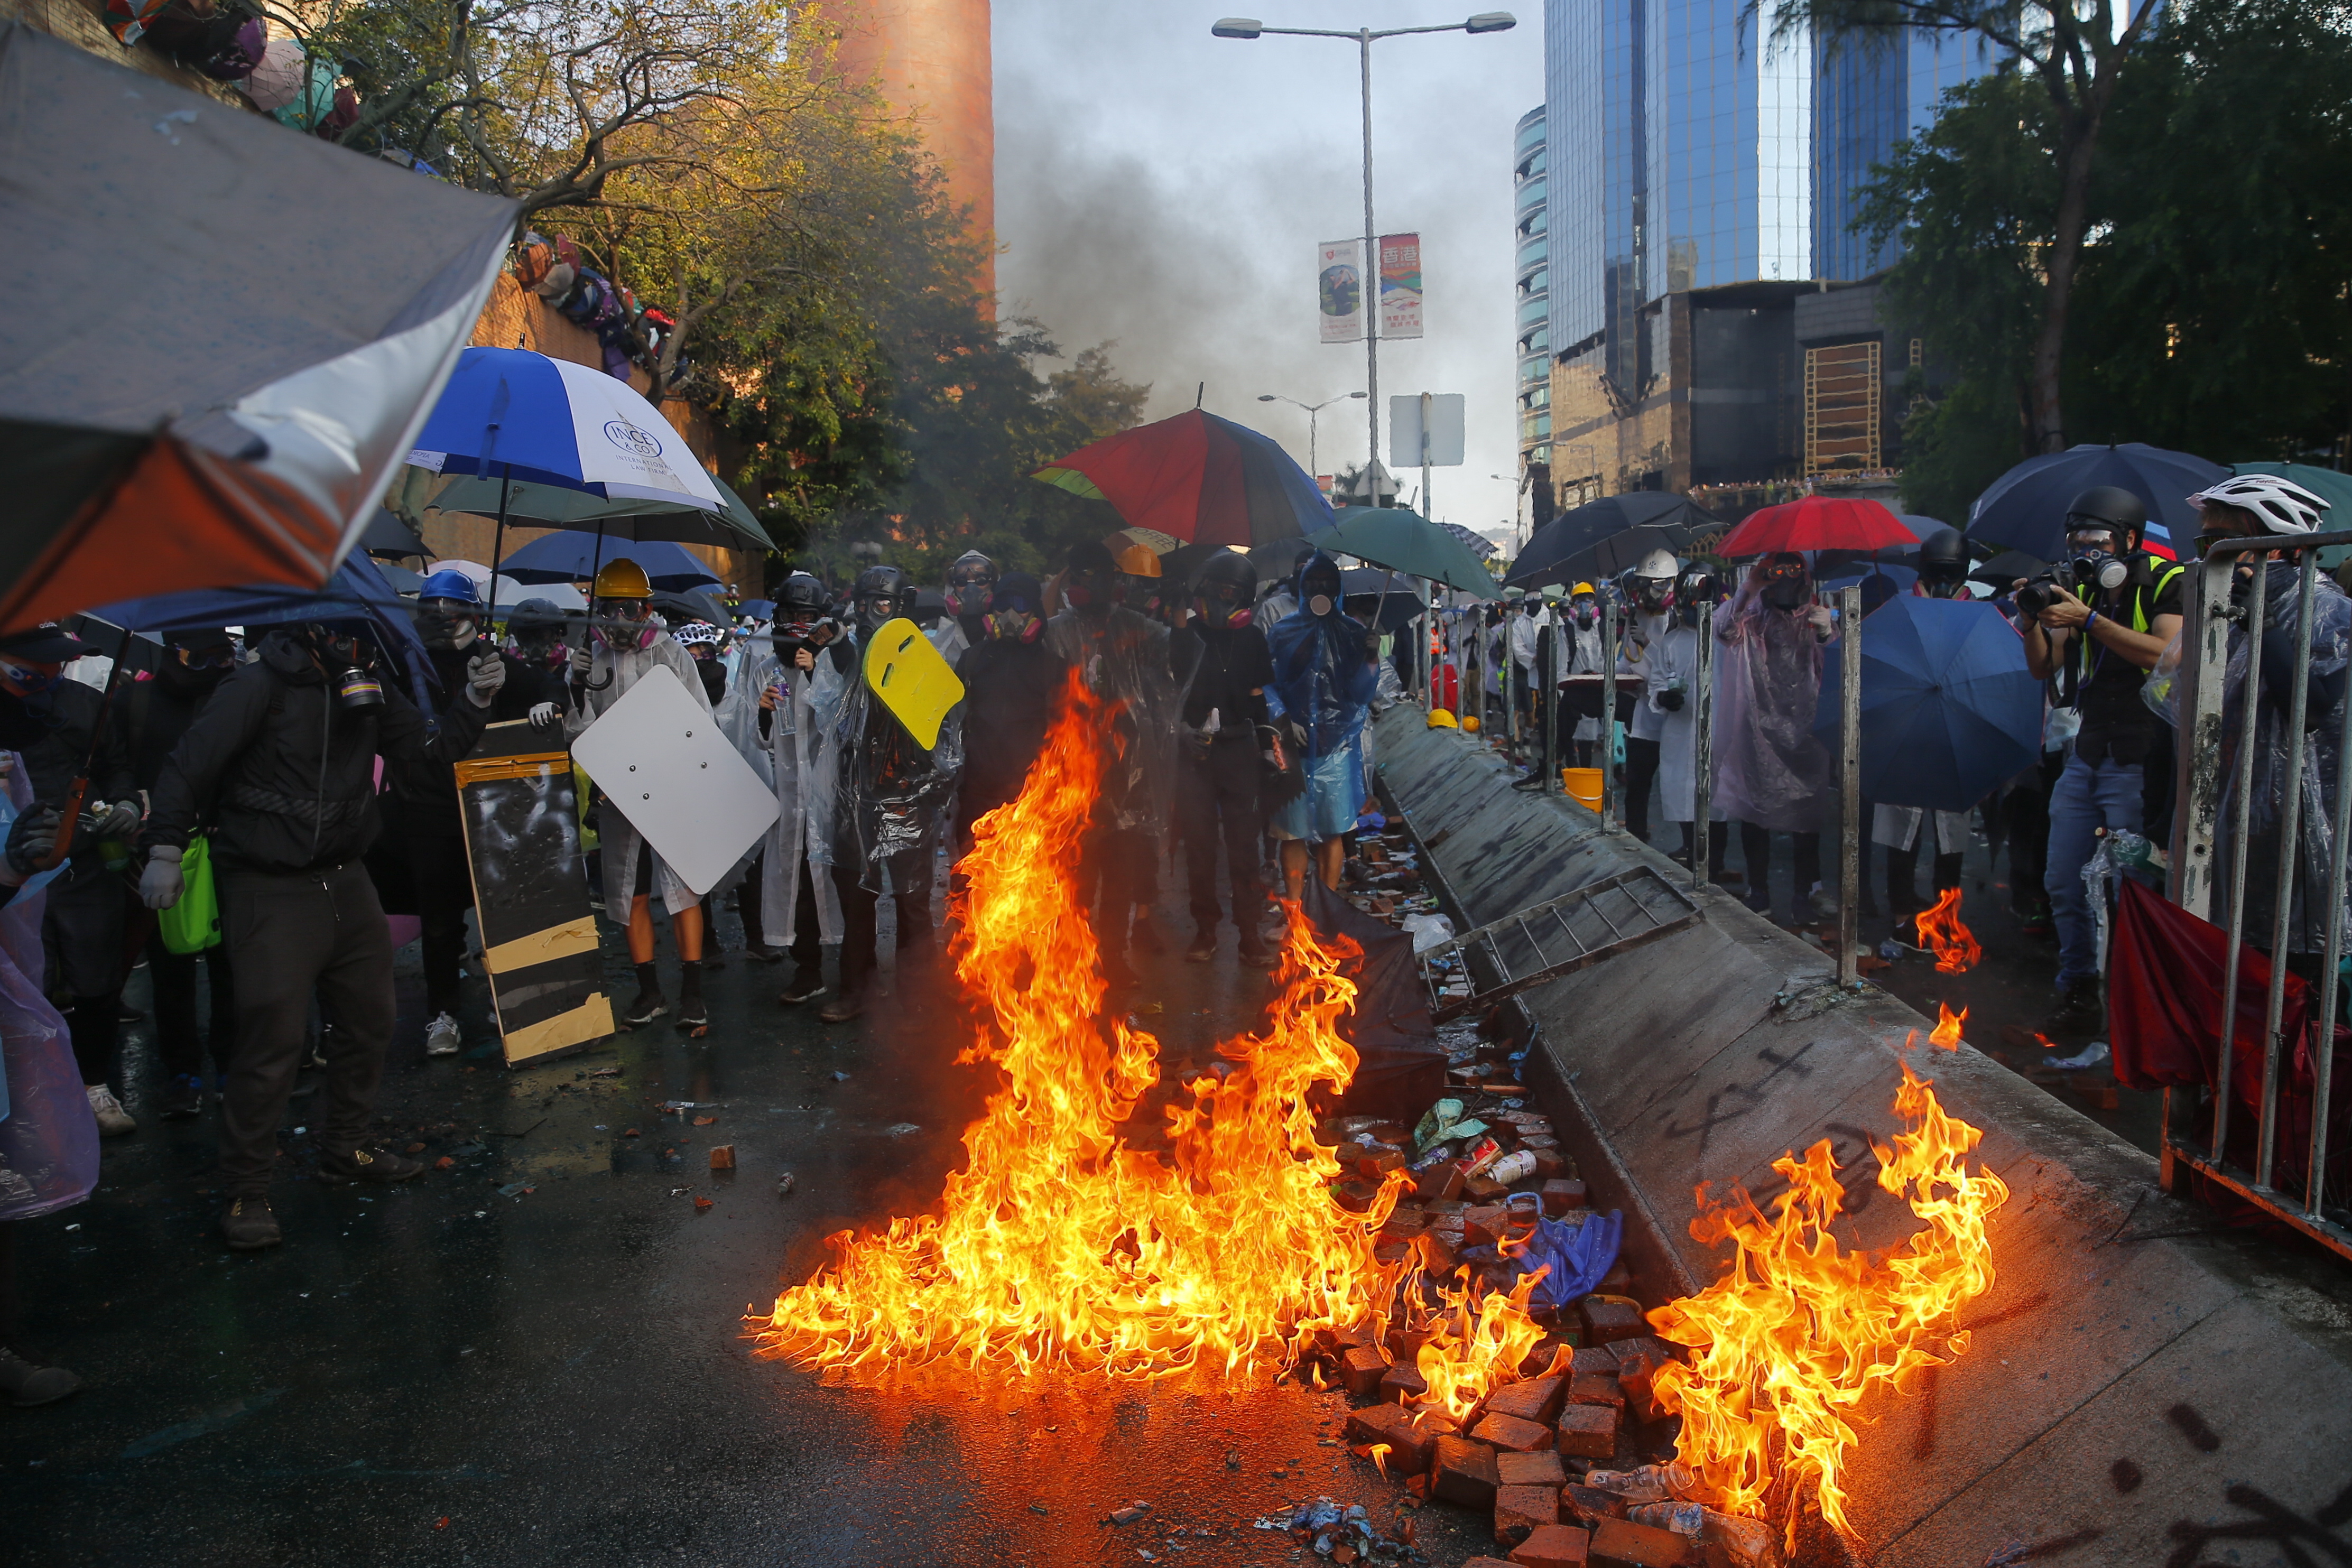 epa08003141 Pro-democracy protesters clash with police (not pictured) outside the Hong Kong Polytechnic University (PolyU), in Hong Kong, China, 17 November 2019. Hong Kong is in its sixth month of mass protests, which were originally triggered by a now withdrawn extradition bill and have since turned into a wider pro-democracy movement.  EPA/FAZRY ISMAIL